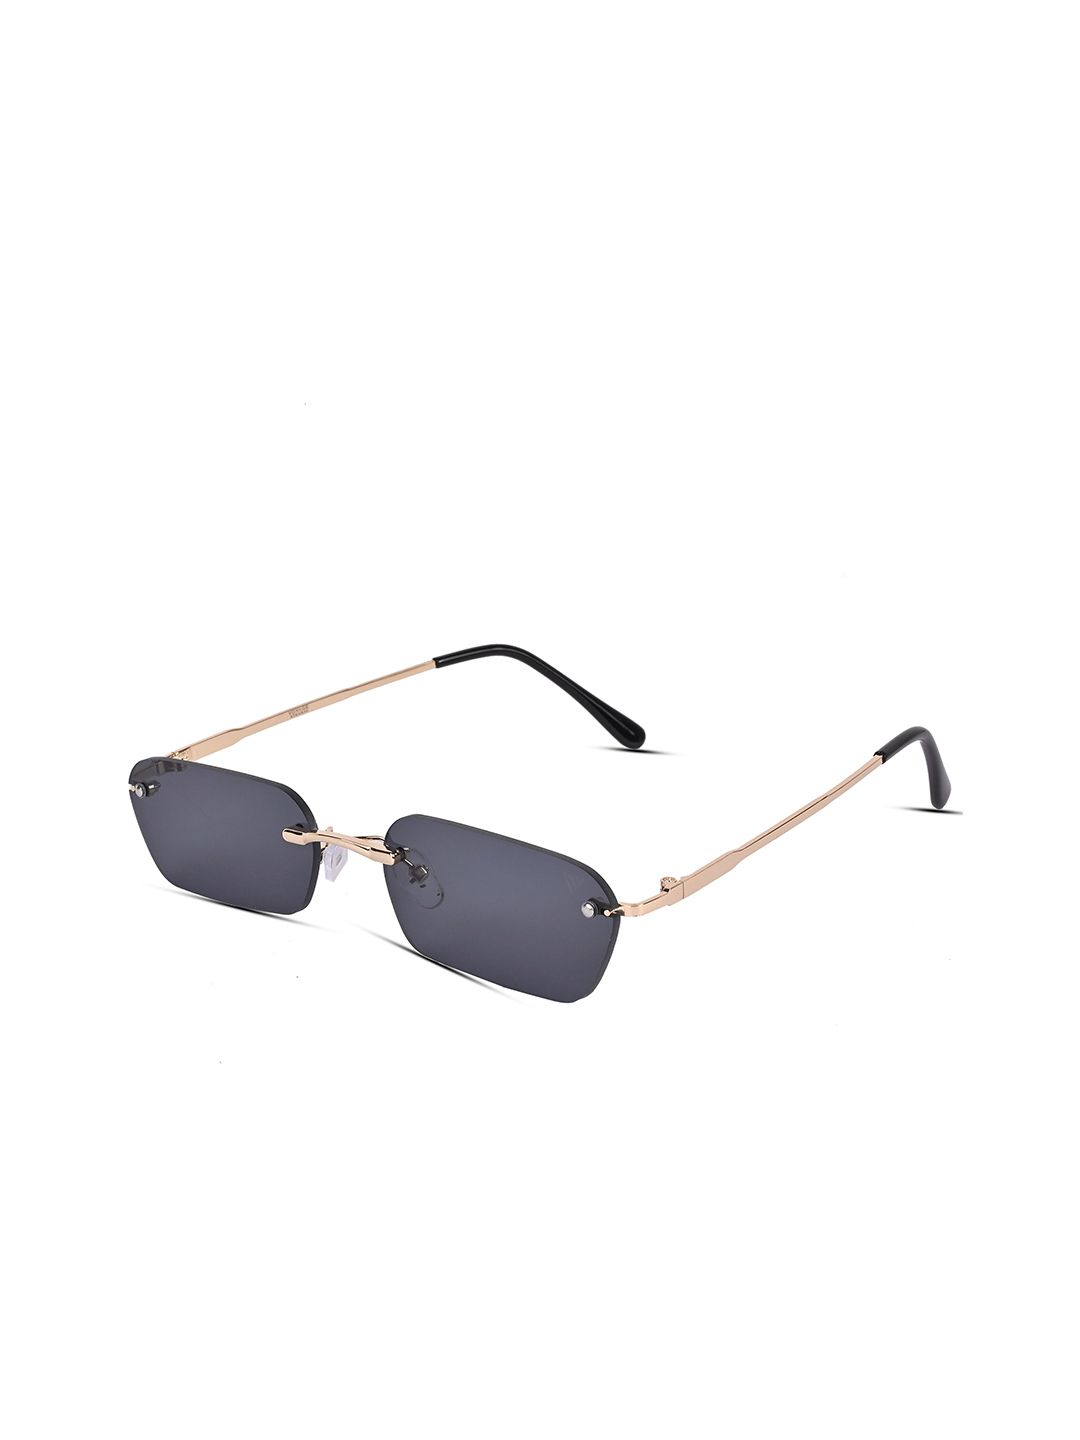 Voyage Unisex Black Lens & Gold-Toned Rectangle Sunglasses with UV Protected Lens Price in India